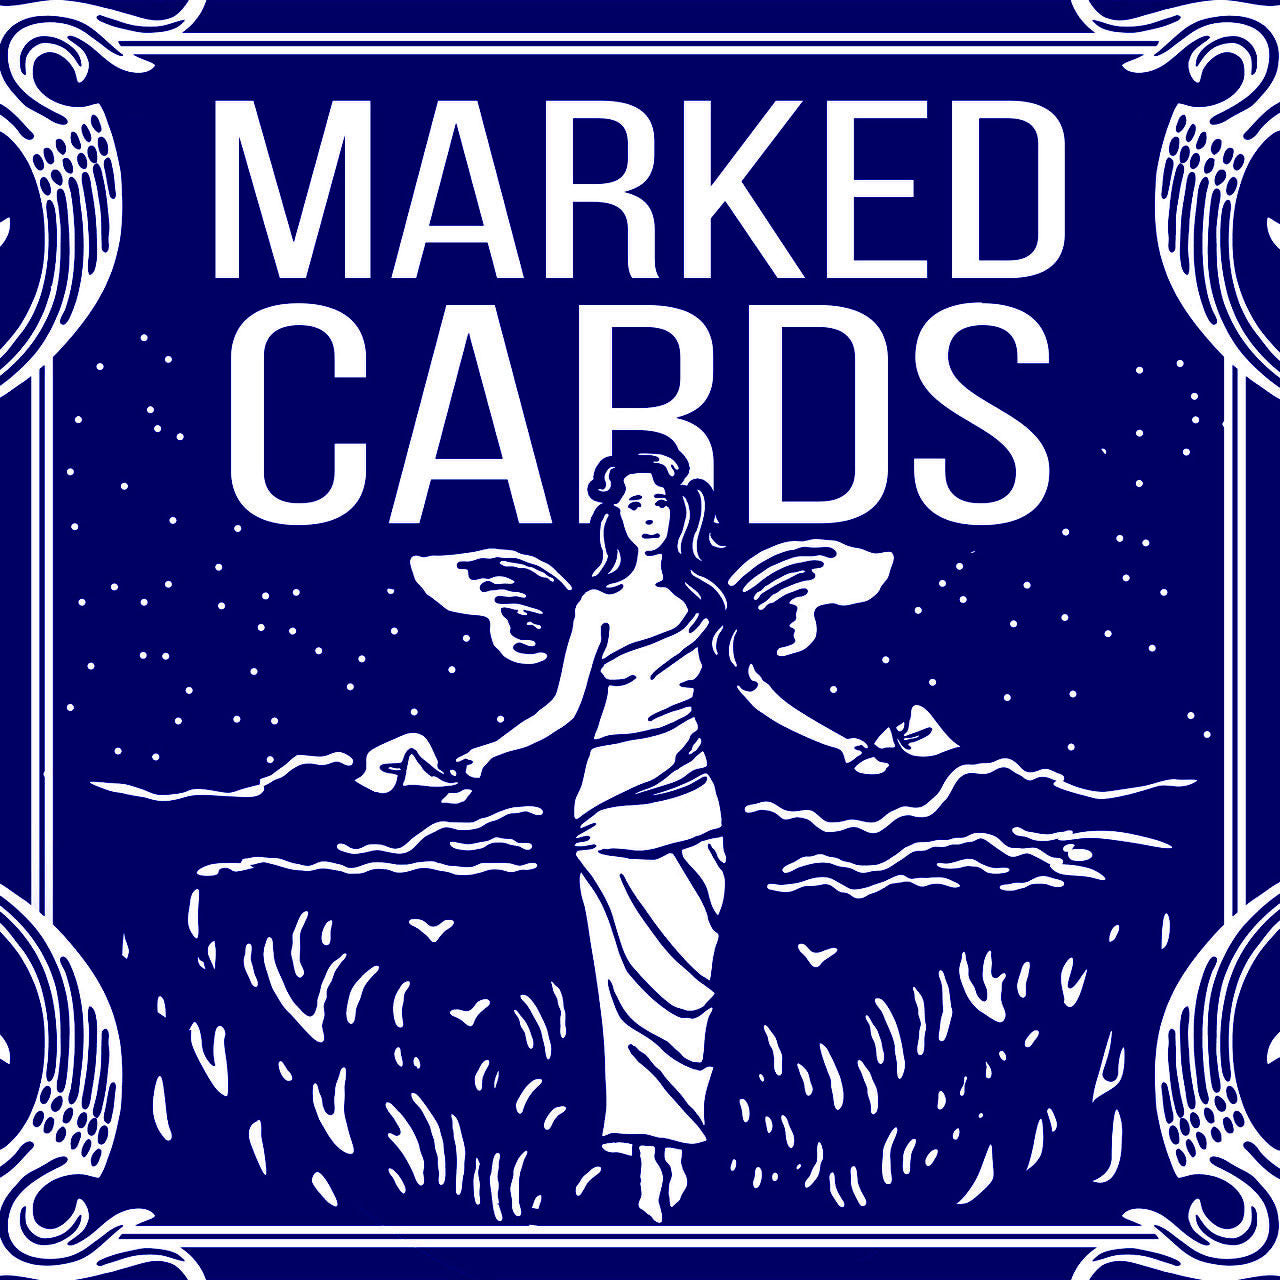 Marked Cards: USPCC Elite Stock - Available at pipermagic.com.au